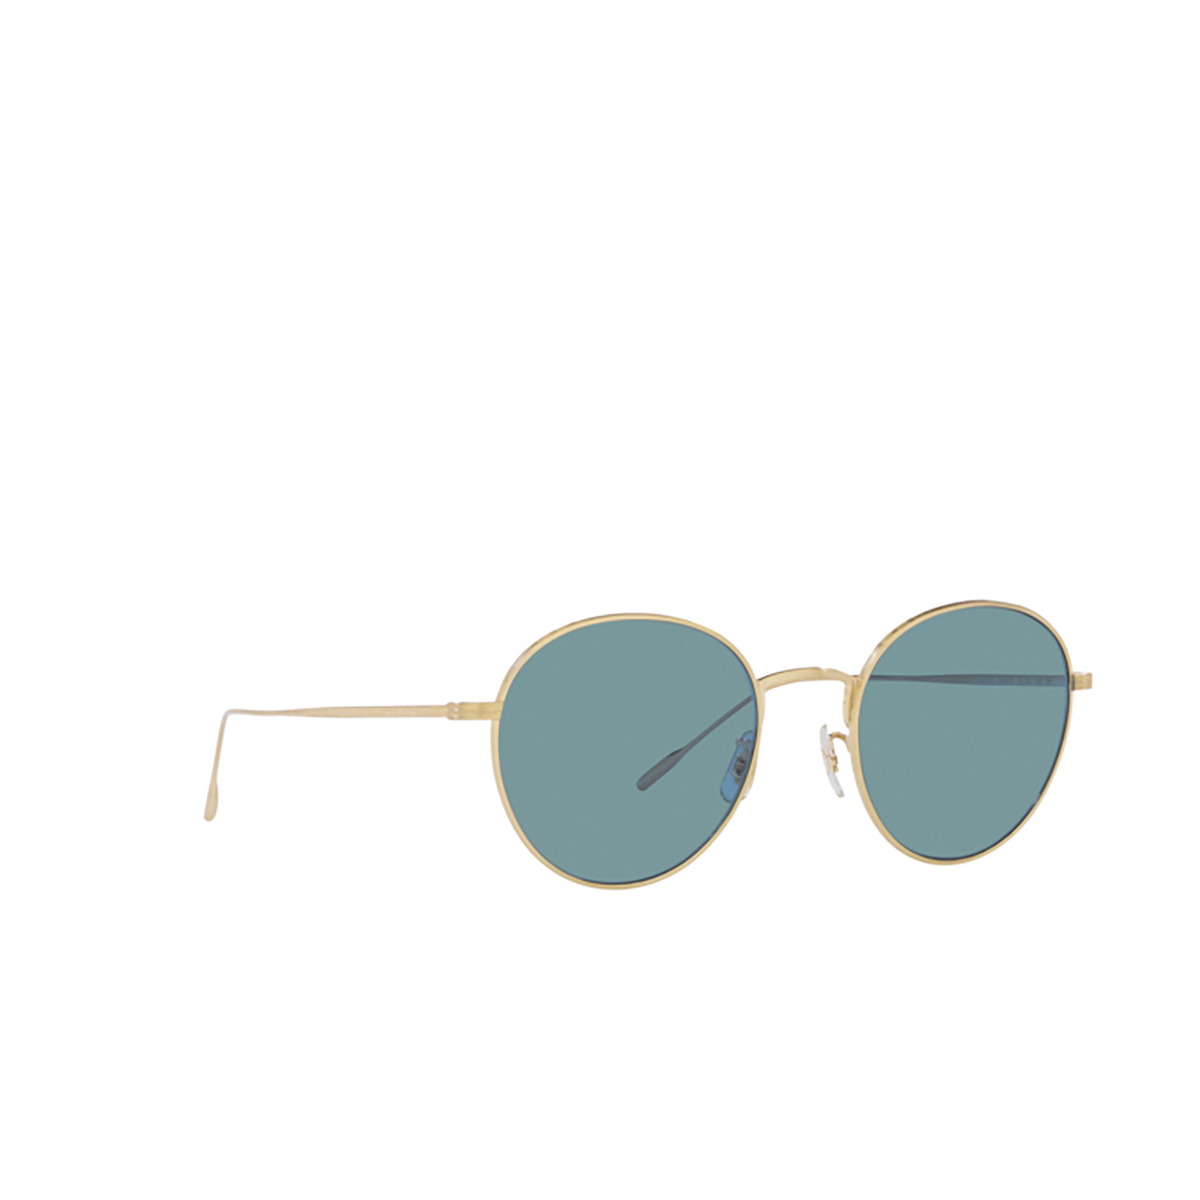 Oliver Peoples ALTAIR Sunglasses 5311P1 Brushed Gold - three-quarters view